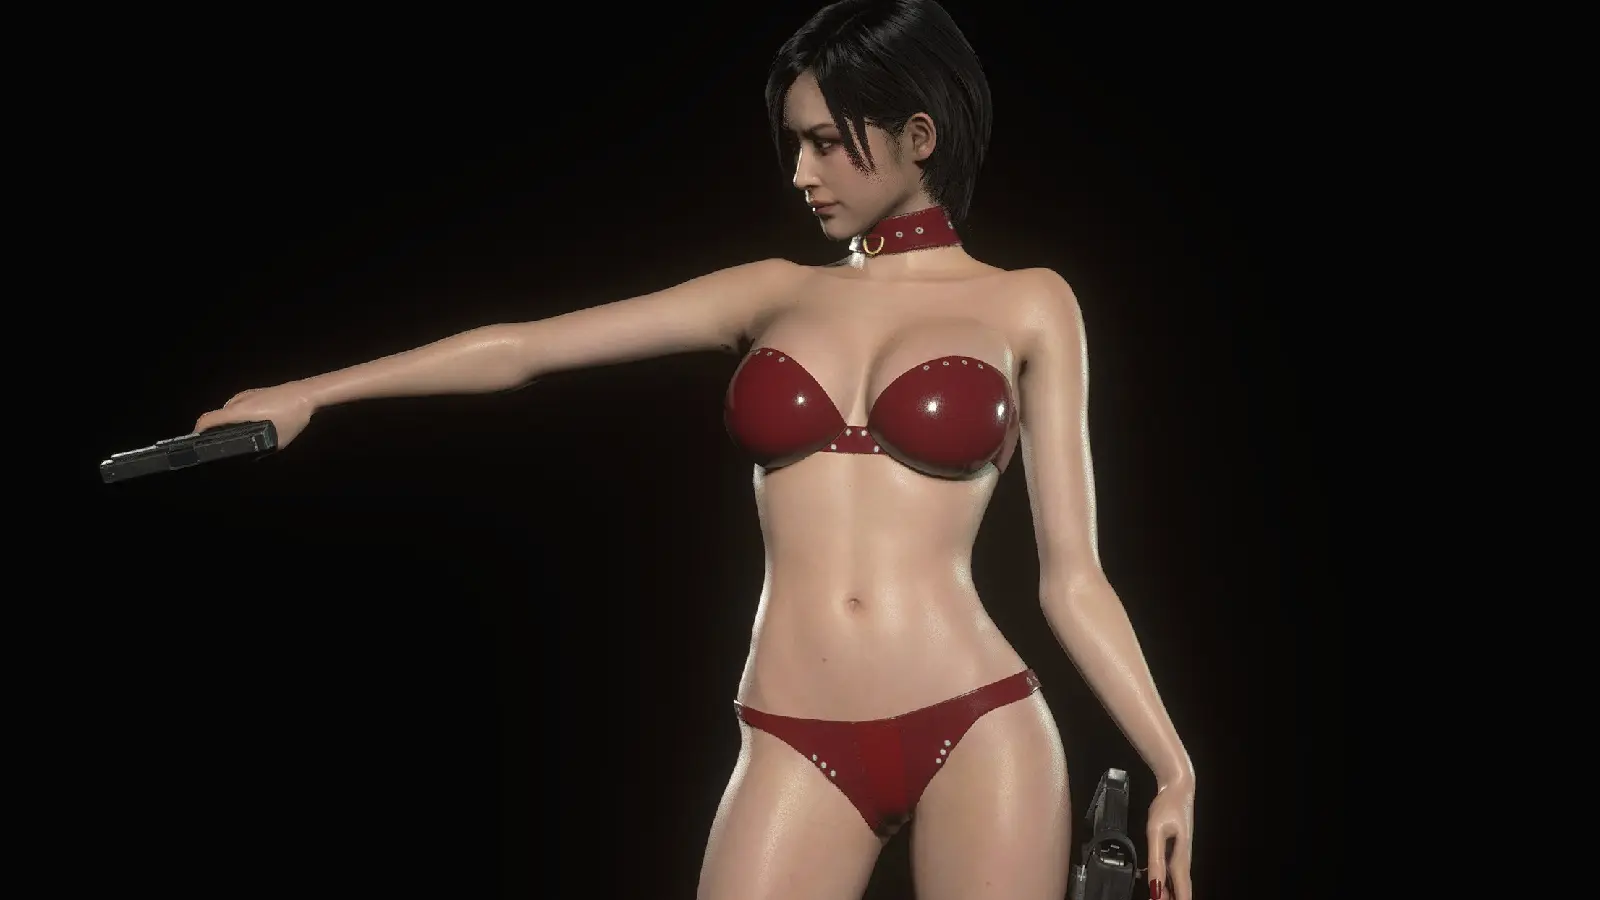 Mod Resident Evil 4 Remake – “Hell in a red bikini with physics of breasts and buttocks”